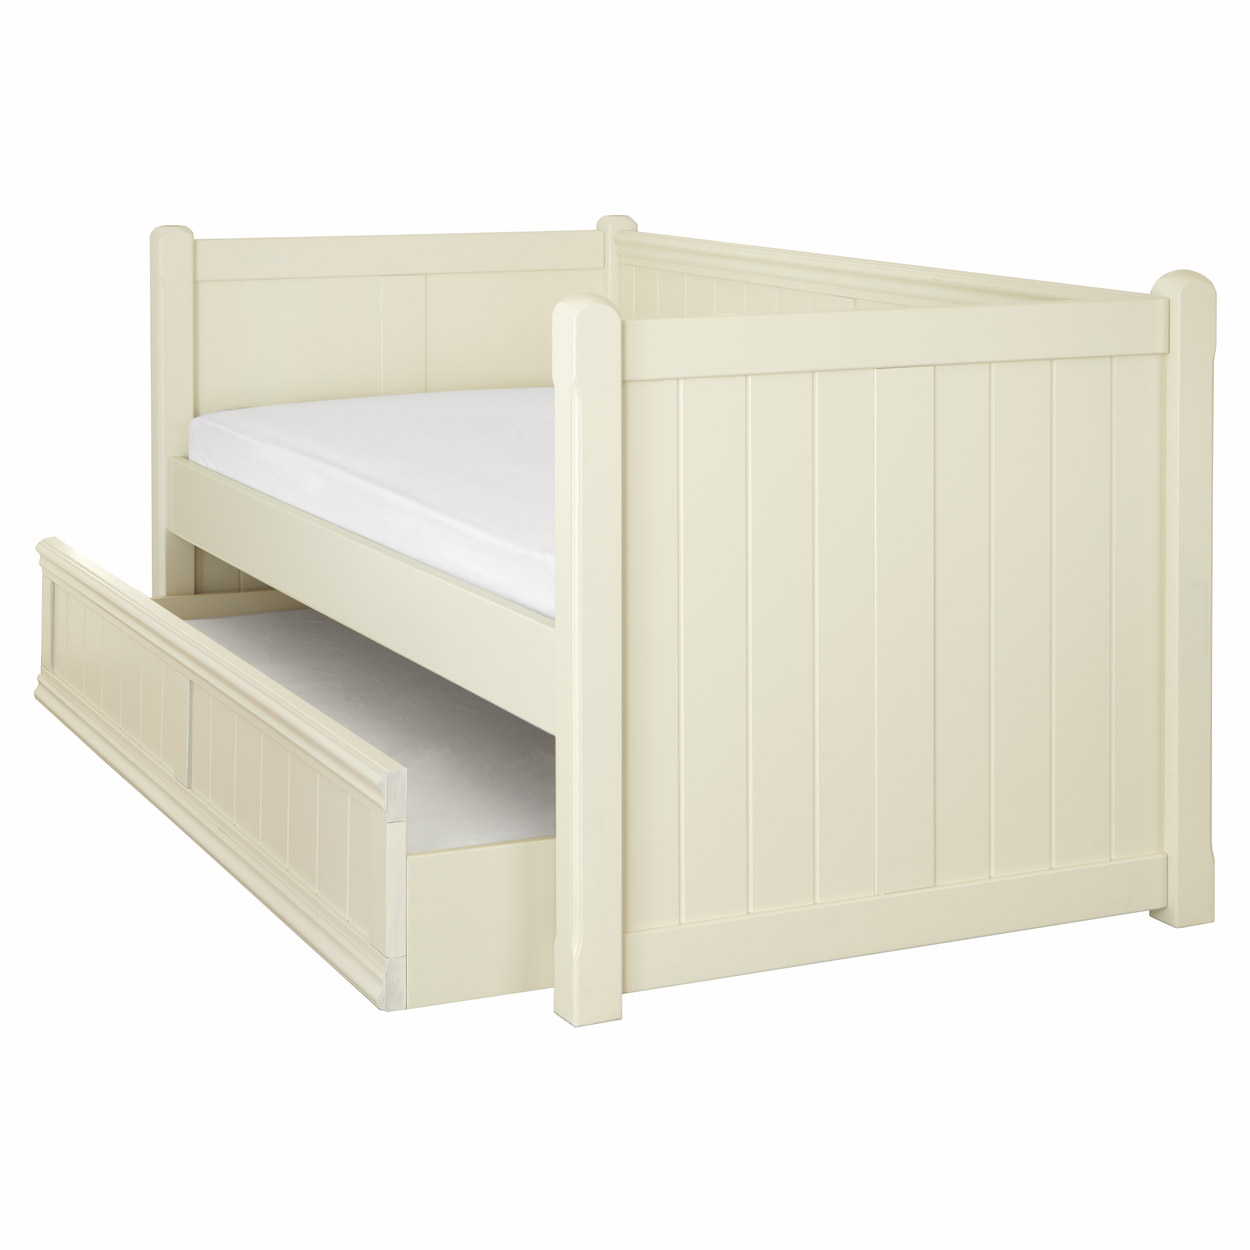 Charterhouse Daybed With Trundle - Antique White